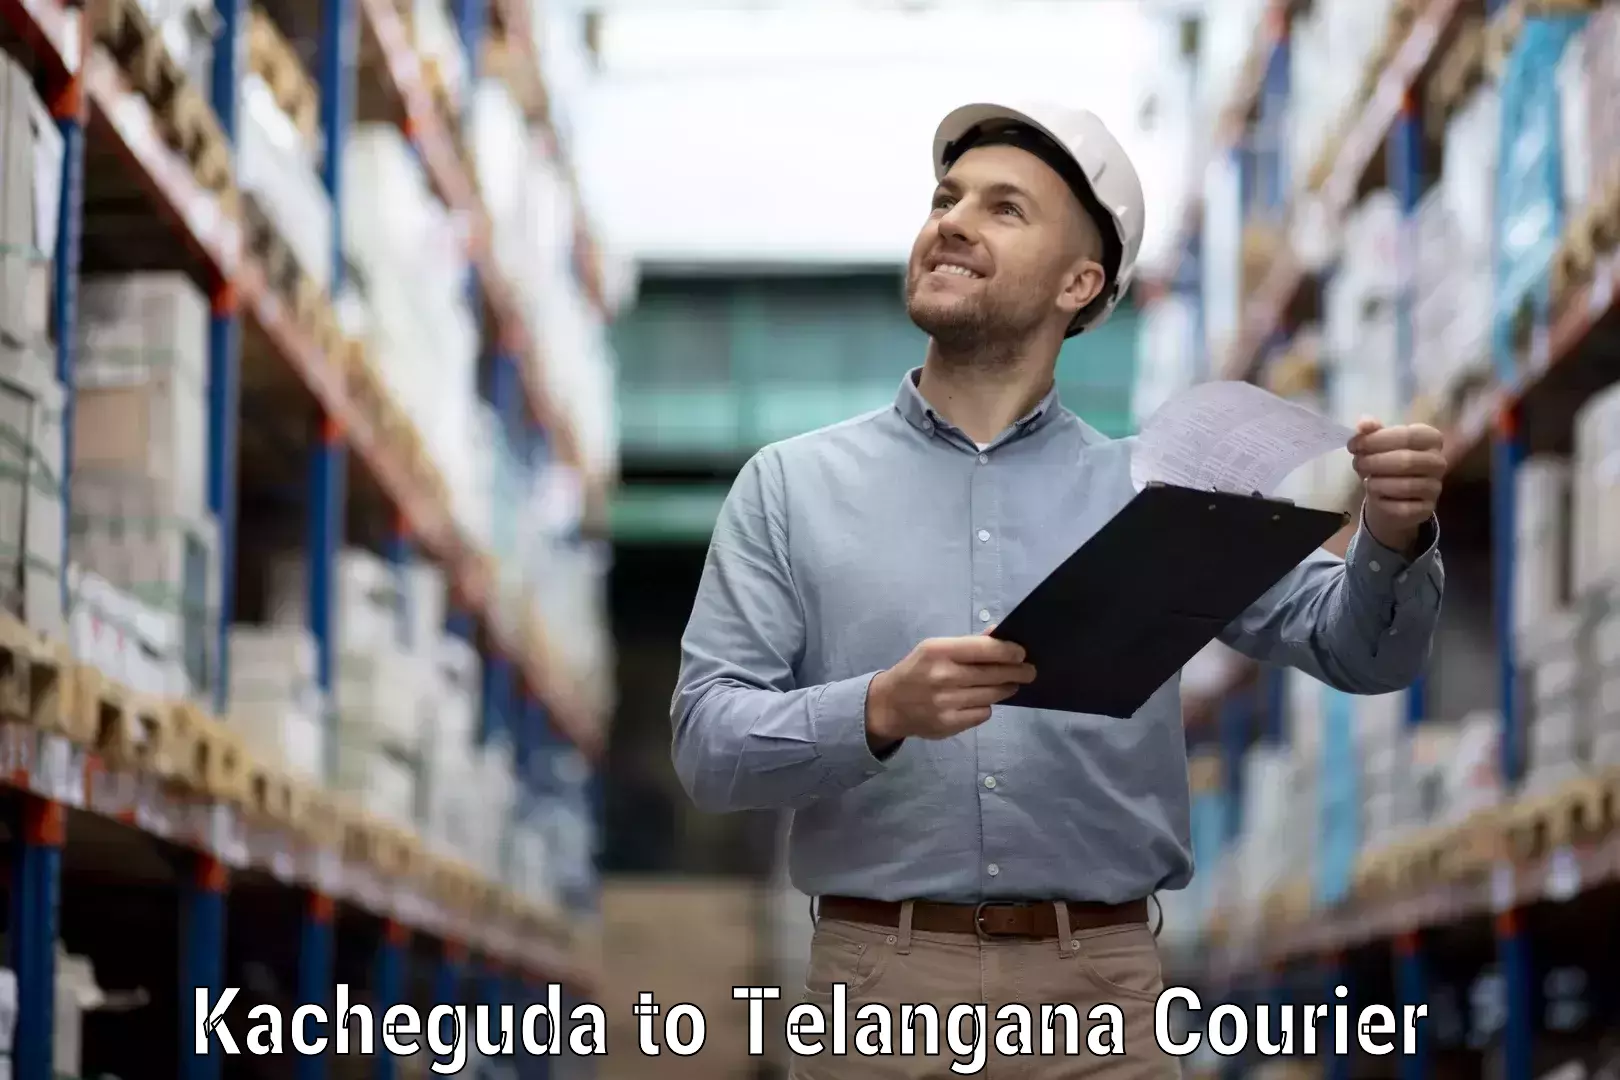 Customer-oriented courier services in Kacheguda to Eligedu